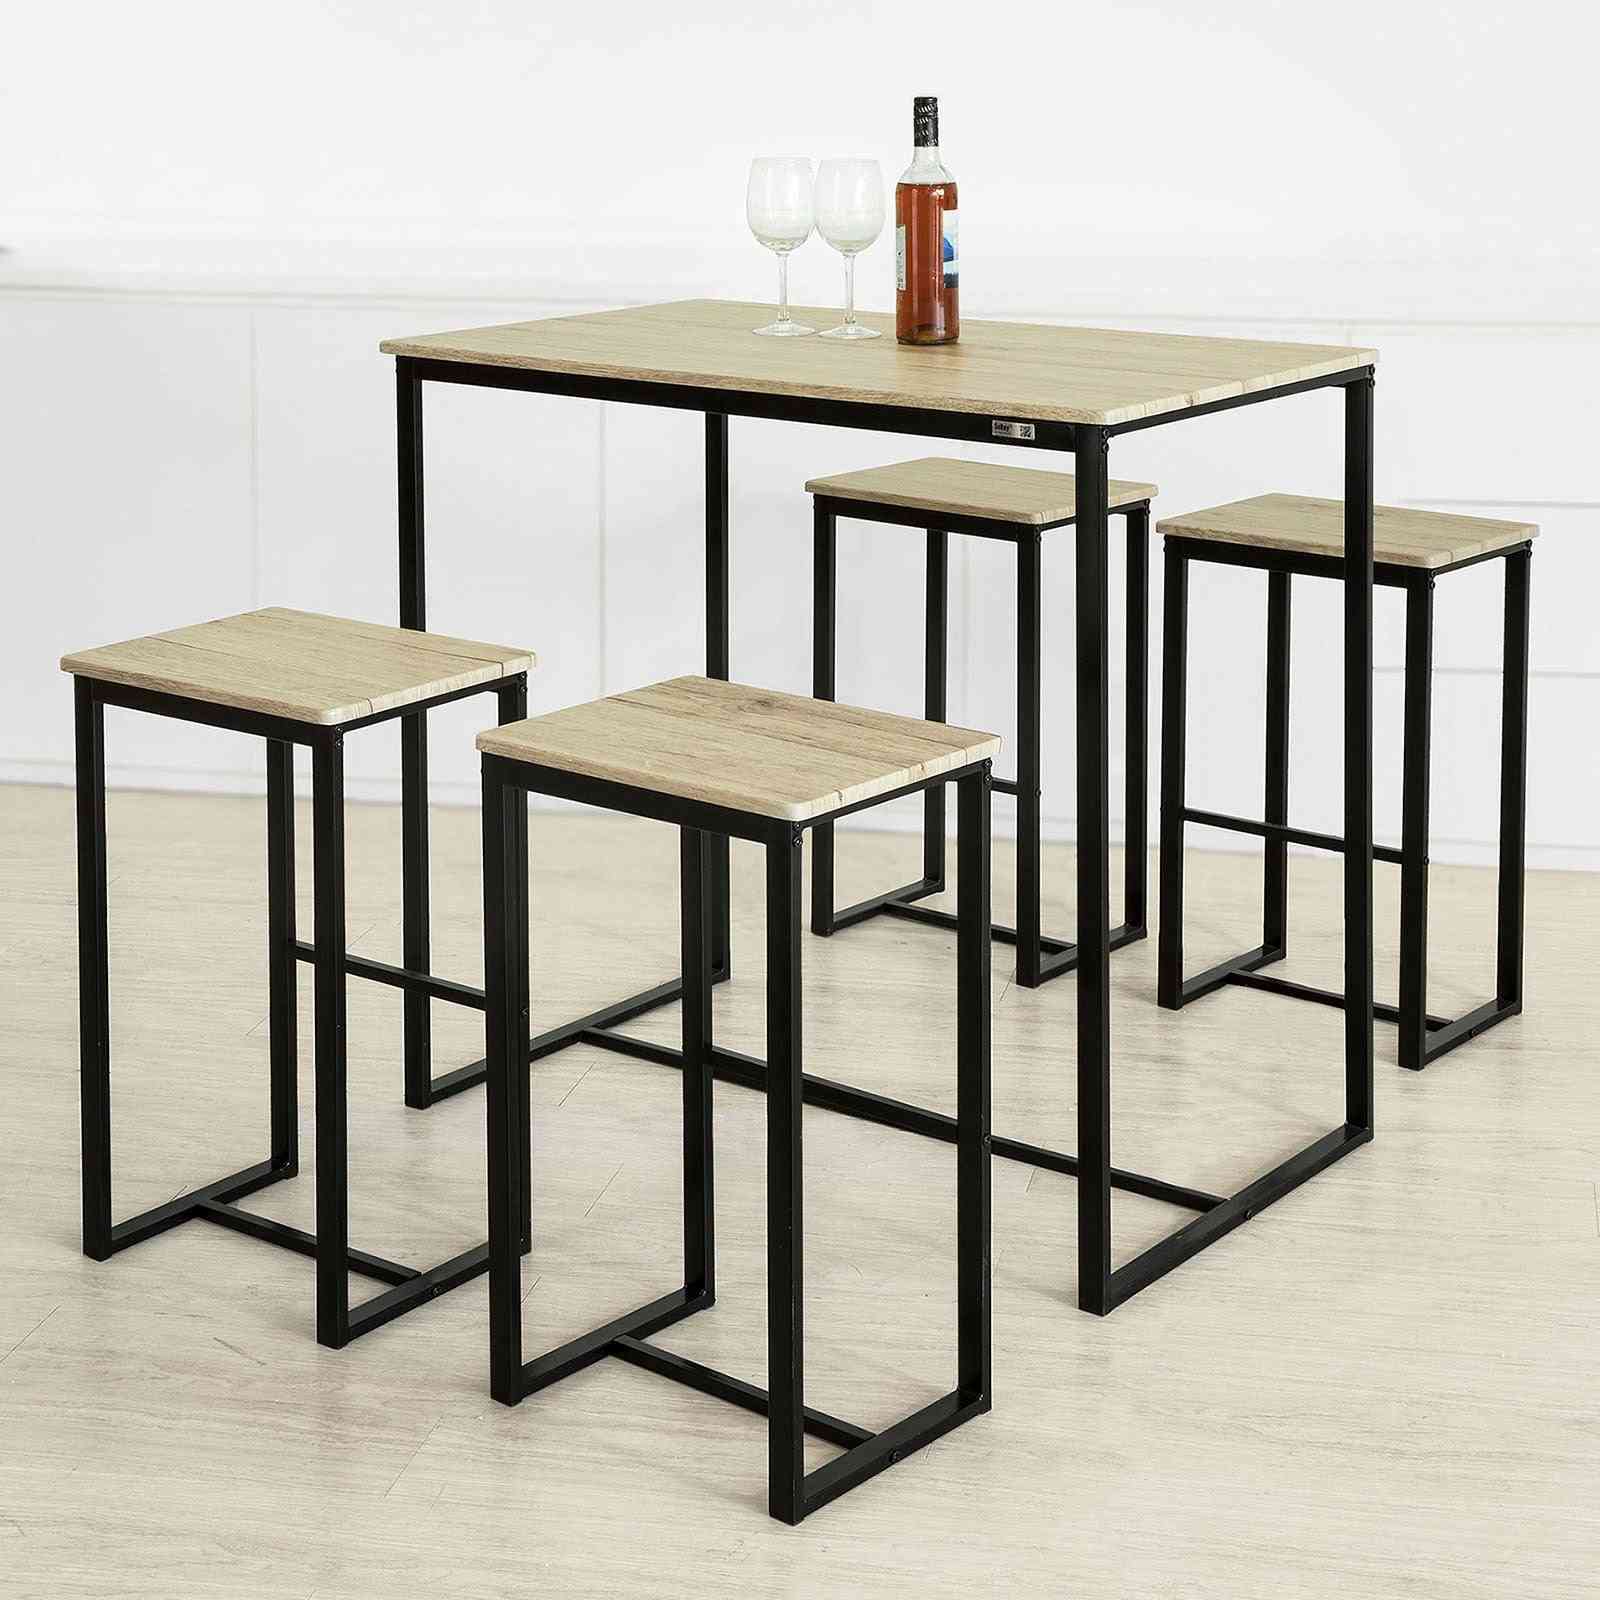 Bar Table And 4 Stools, Home Kitchen Breakfast Bar Set/furniture Dining Set